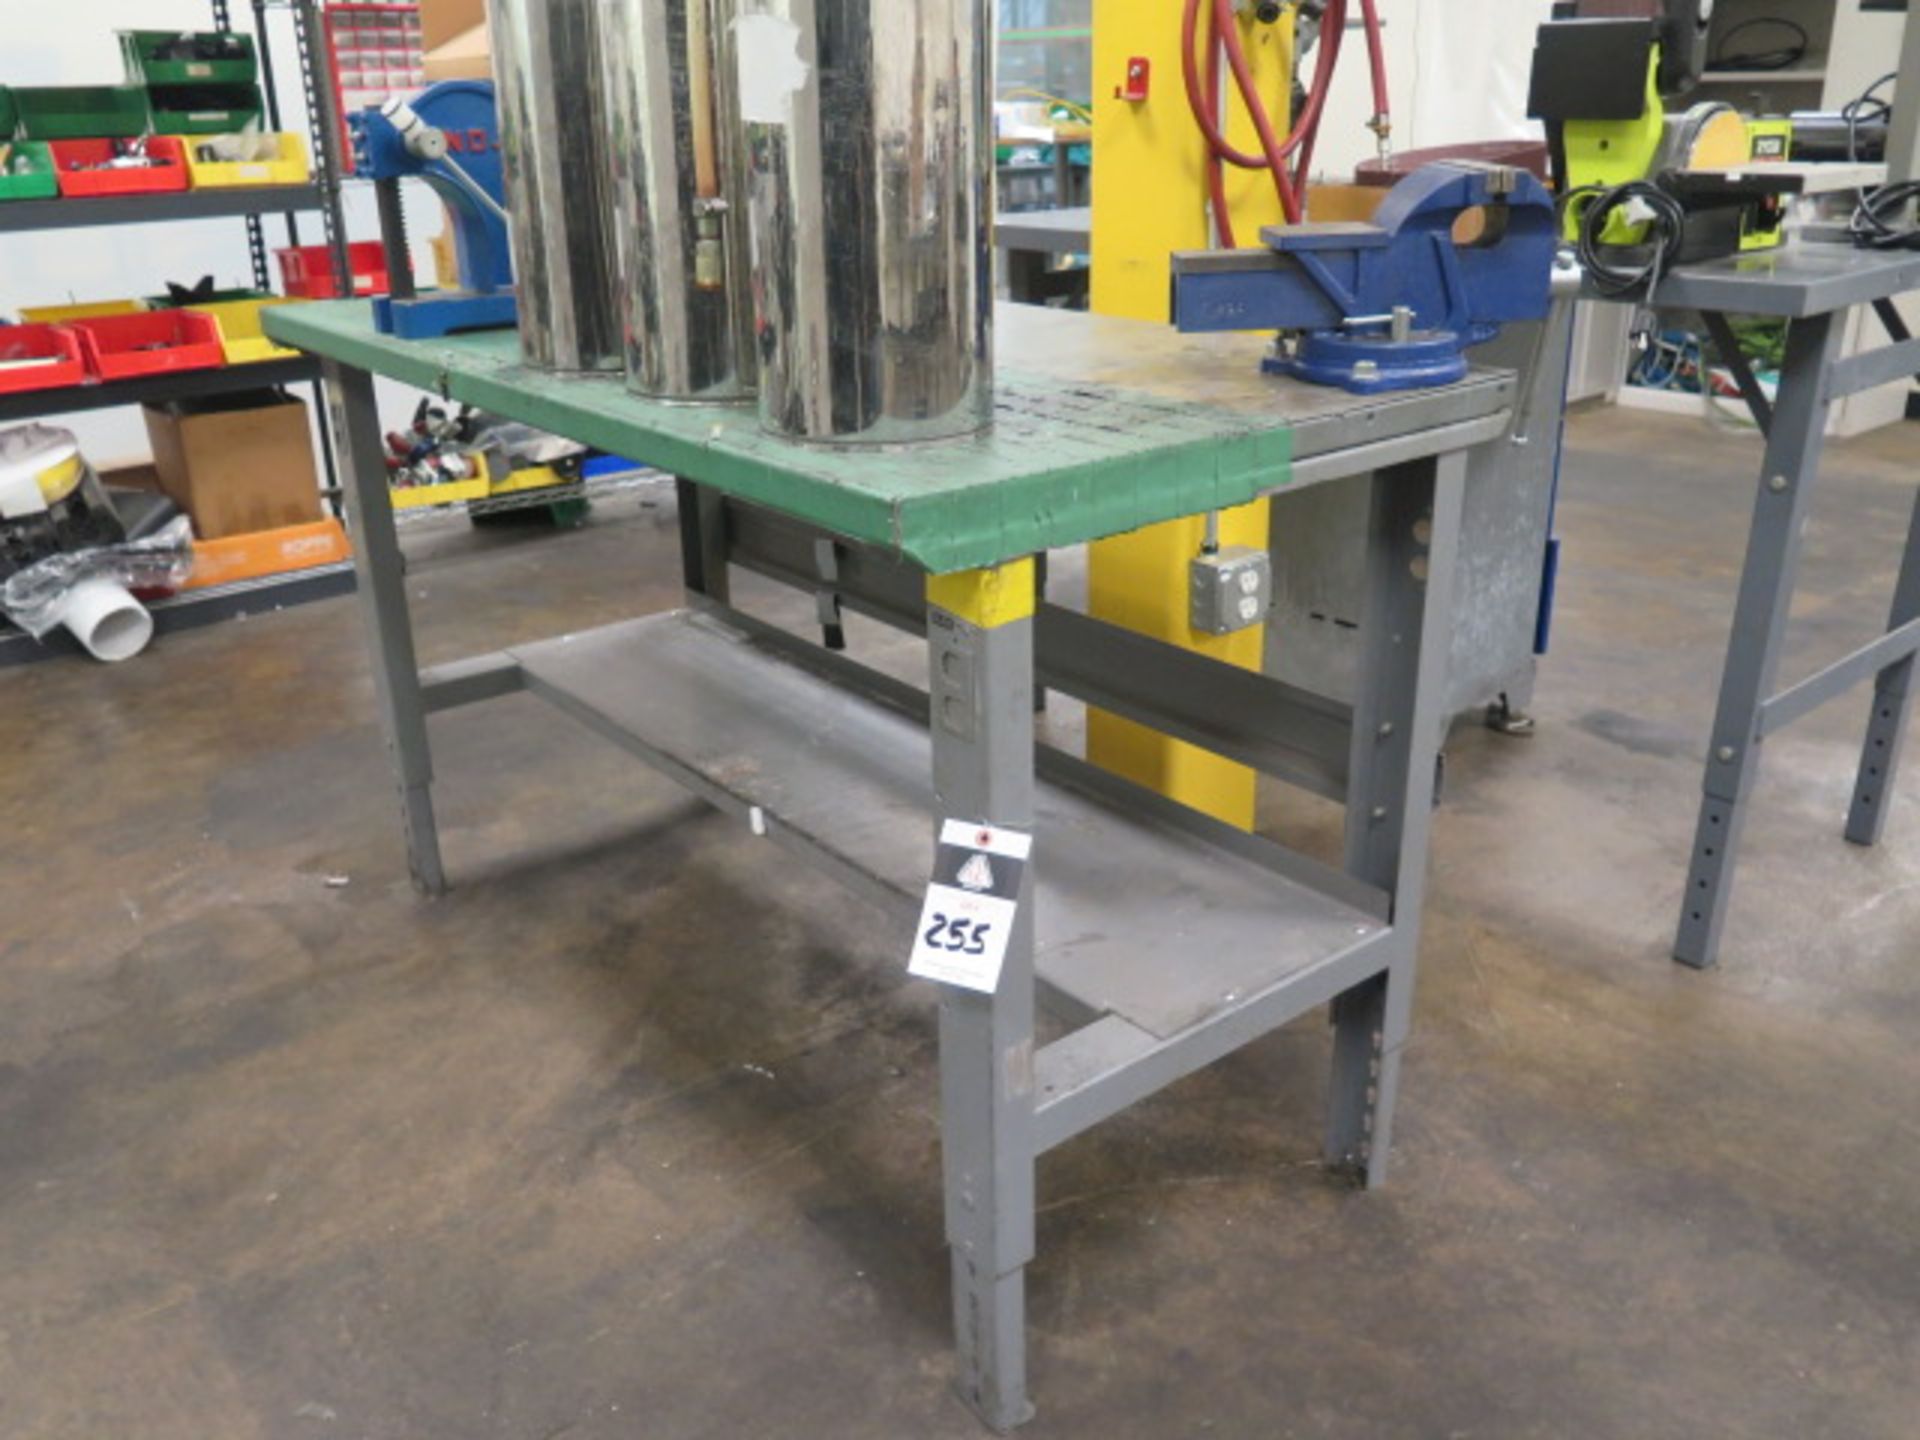 Uline Steel Work bench w/ Bench Vise and Arbor Press (SOLD AS-IS - NO WARRANTY)